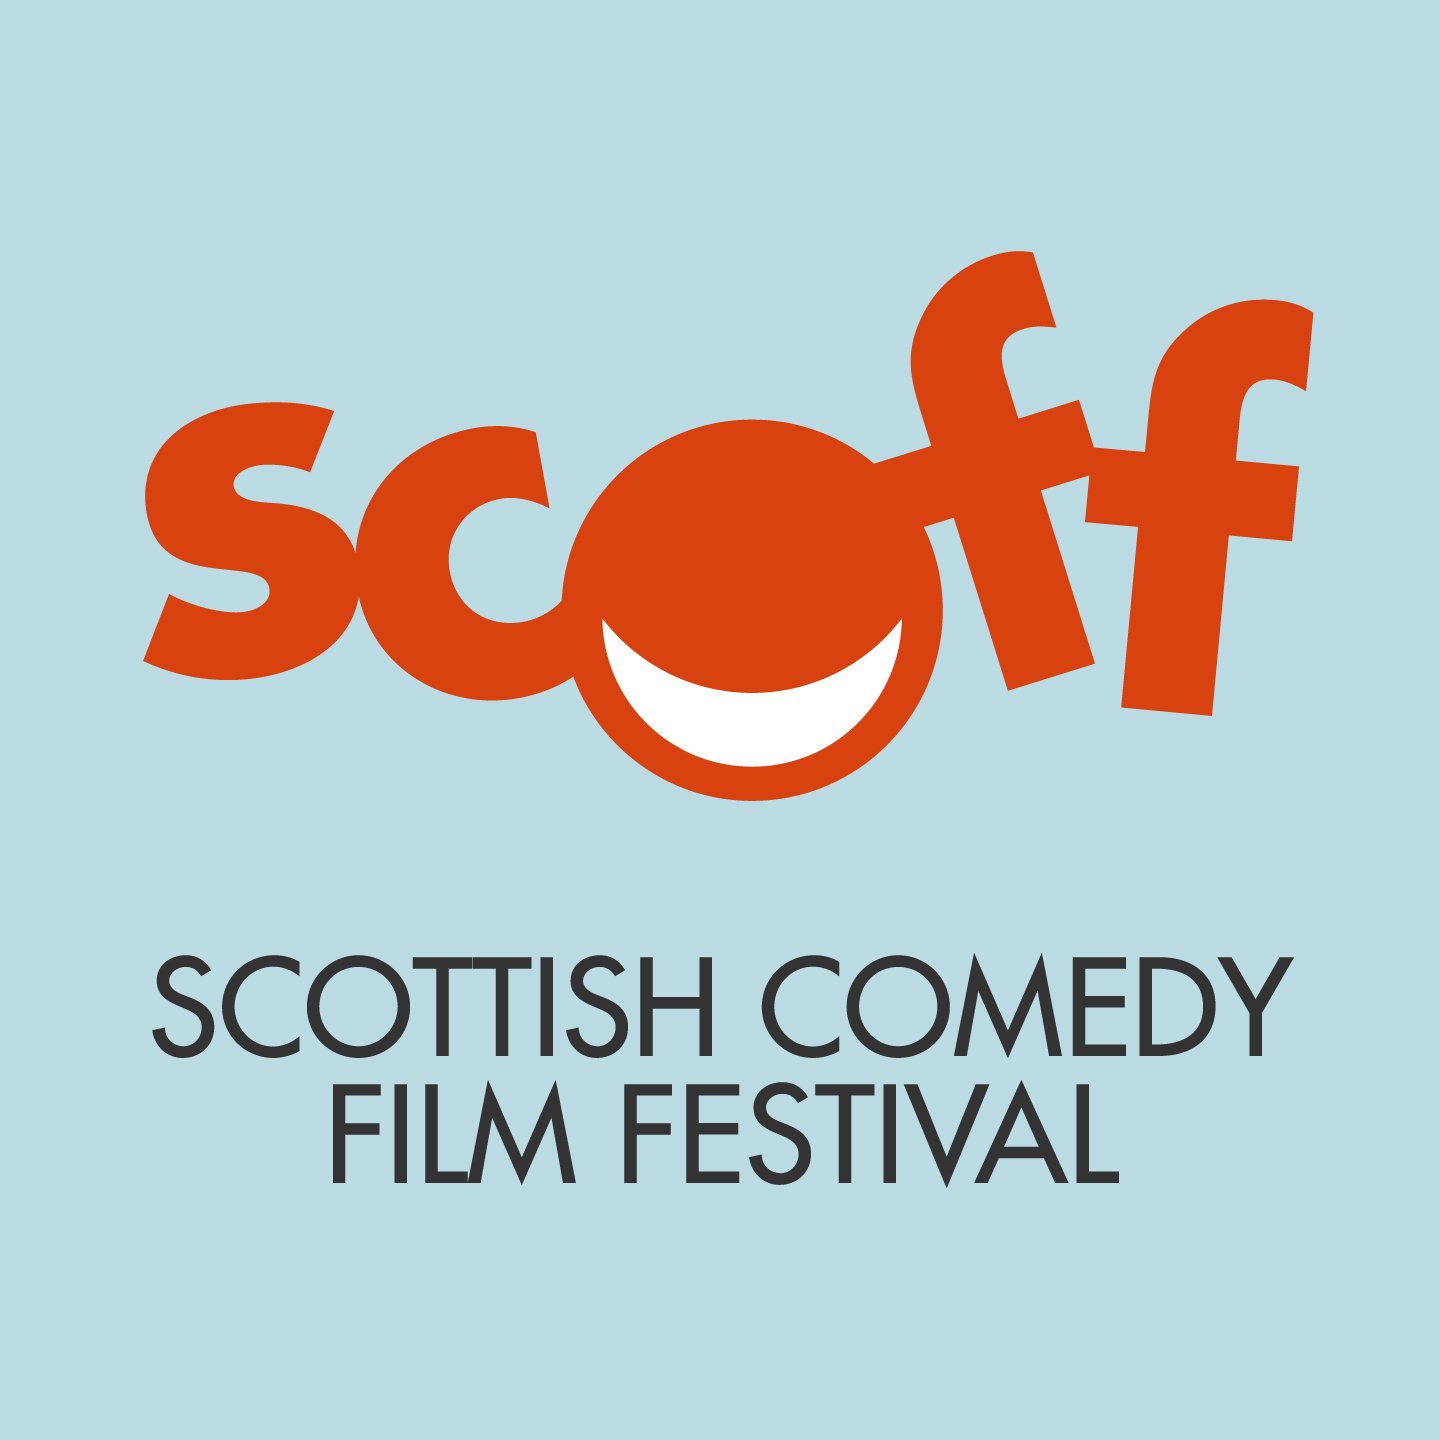 The Scottish Comedy Film Festival at the best cinema in the world @CTPictureHouse. Founded 2018. More laughs on the way. #cinema #comedy #scotland #campbeltown